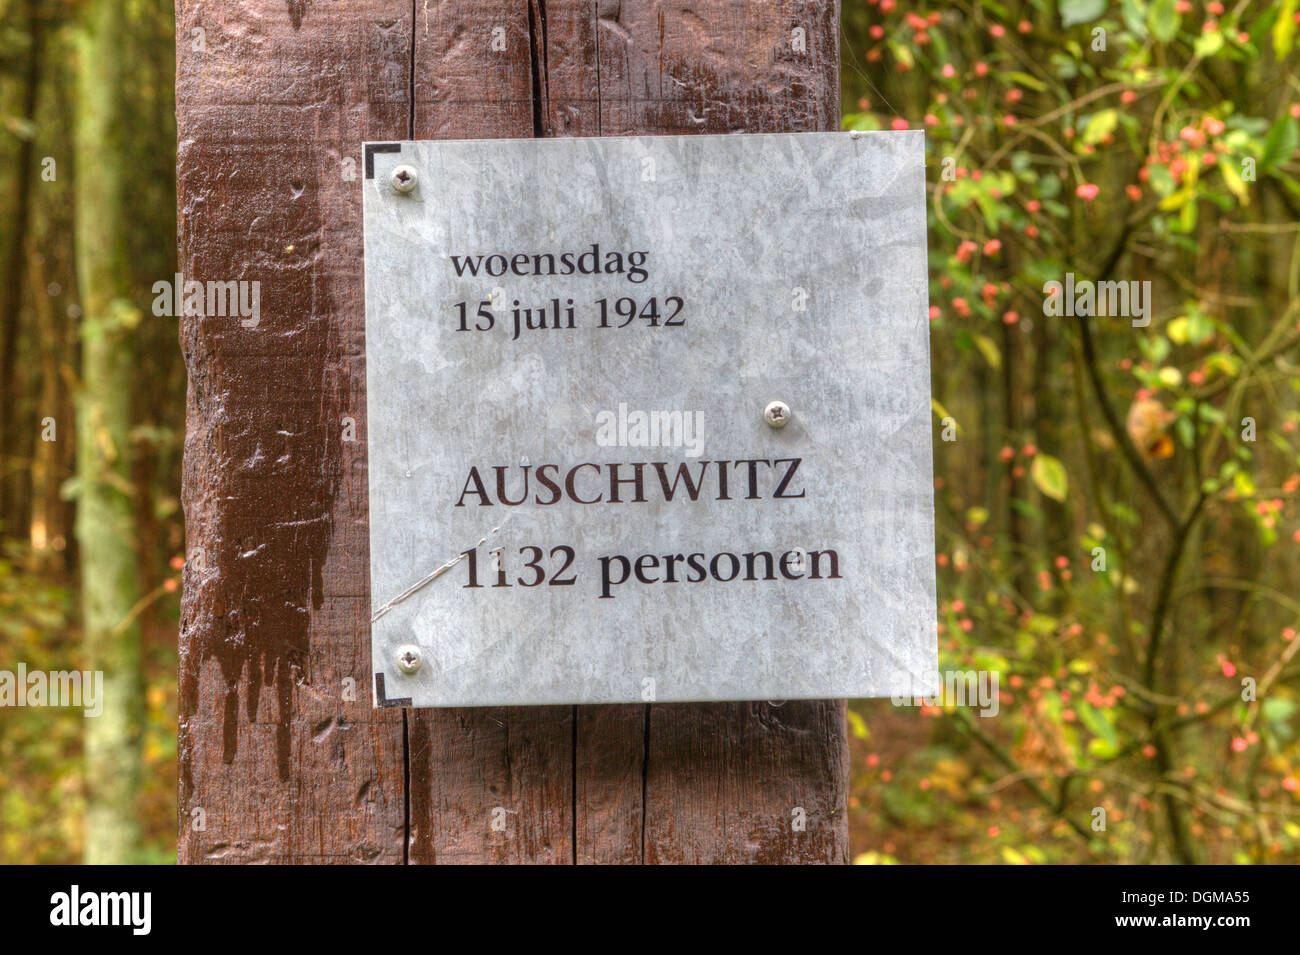 Sign with reference to the victims of Auschwitz Camp Westerbork, Netherlands Stock Photo